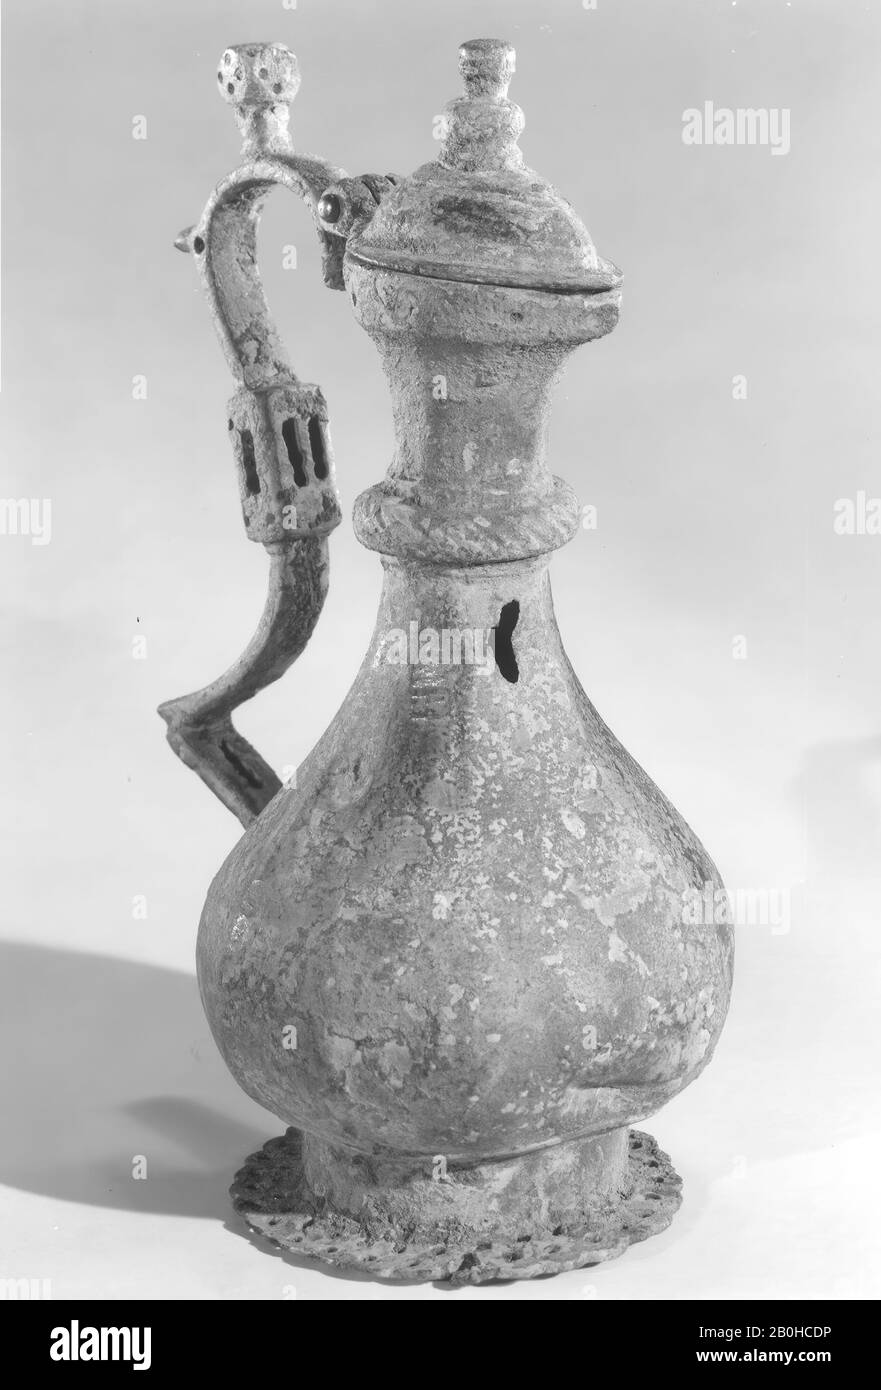 Ewer, 8th–9th century, Attributed to Iran, Bronze; cast, engraved, and pierced, H. 6 7/16 in. (16.4 cm), W. 4 in. (10.2 cm), D. 2 7/8 in. (7.3 cm), Wt. 14.5 oz. (411.1 g), Metal Stock Photo